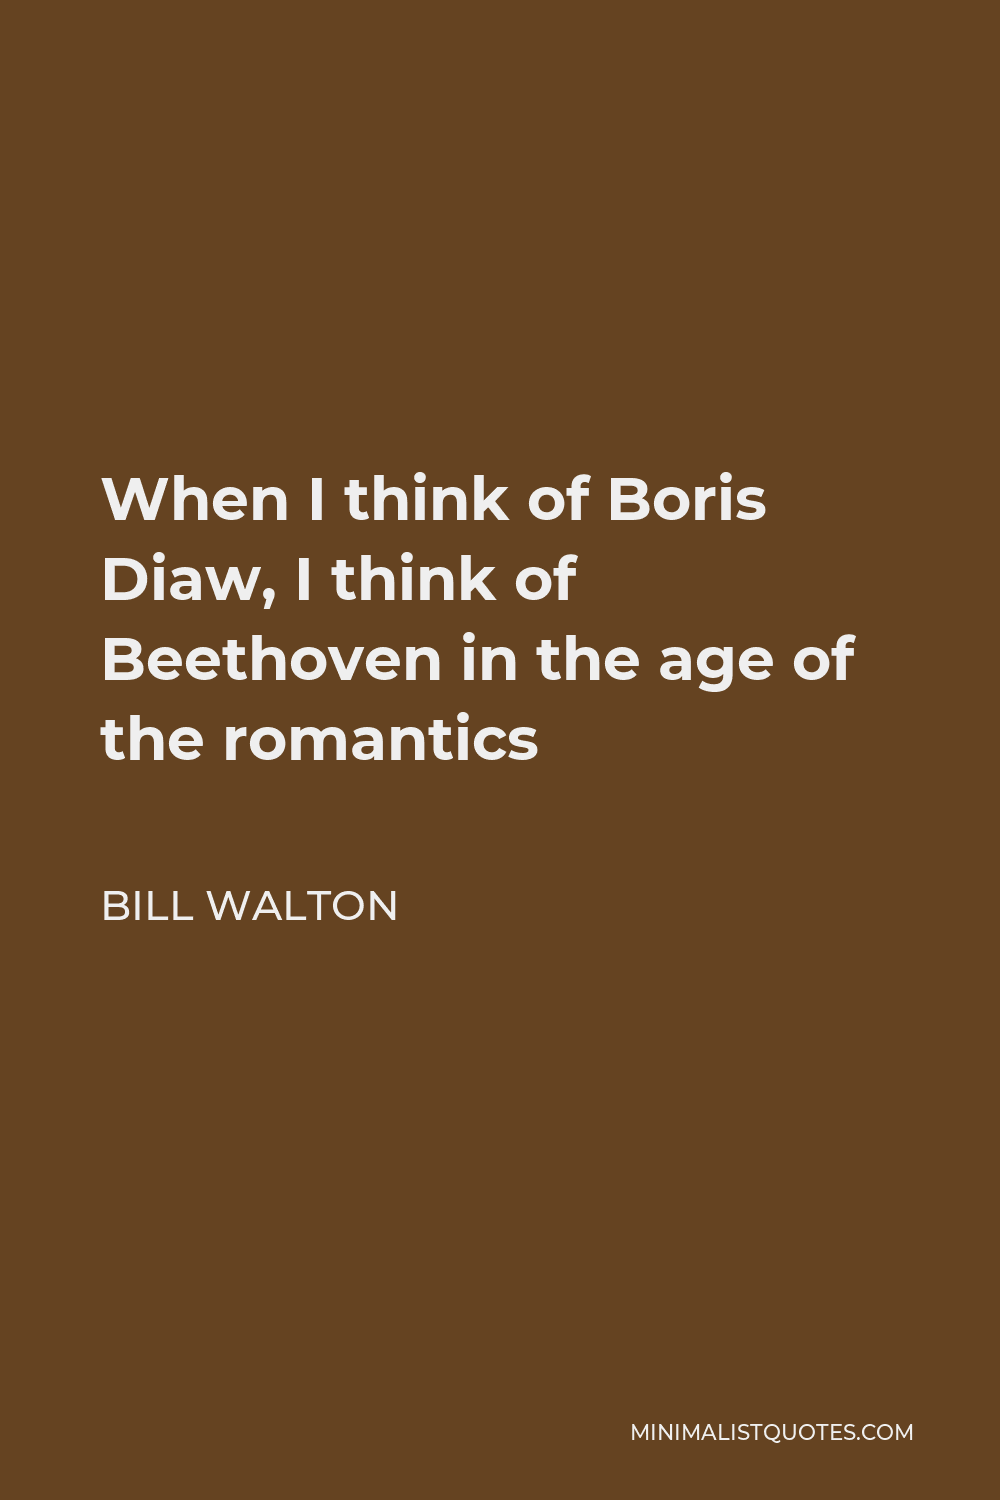 Bill Walton Quote - When I think of Boris Diaw, I think of Beethoven in the age of the romantics